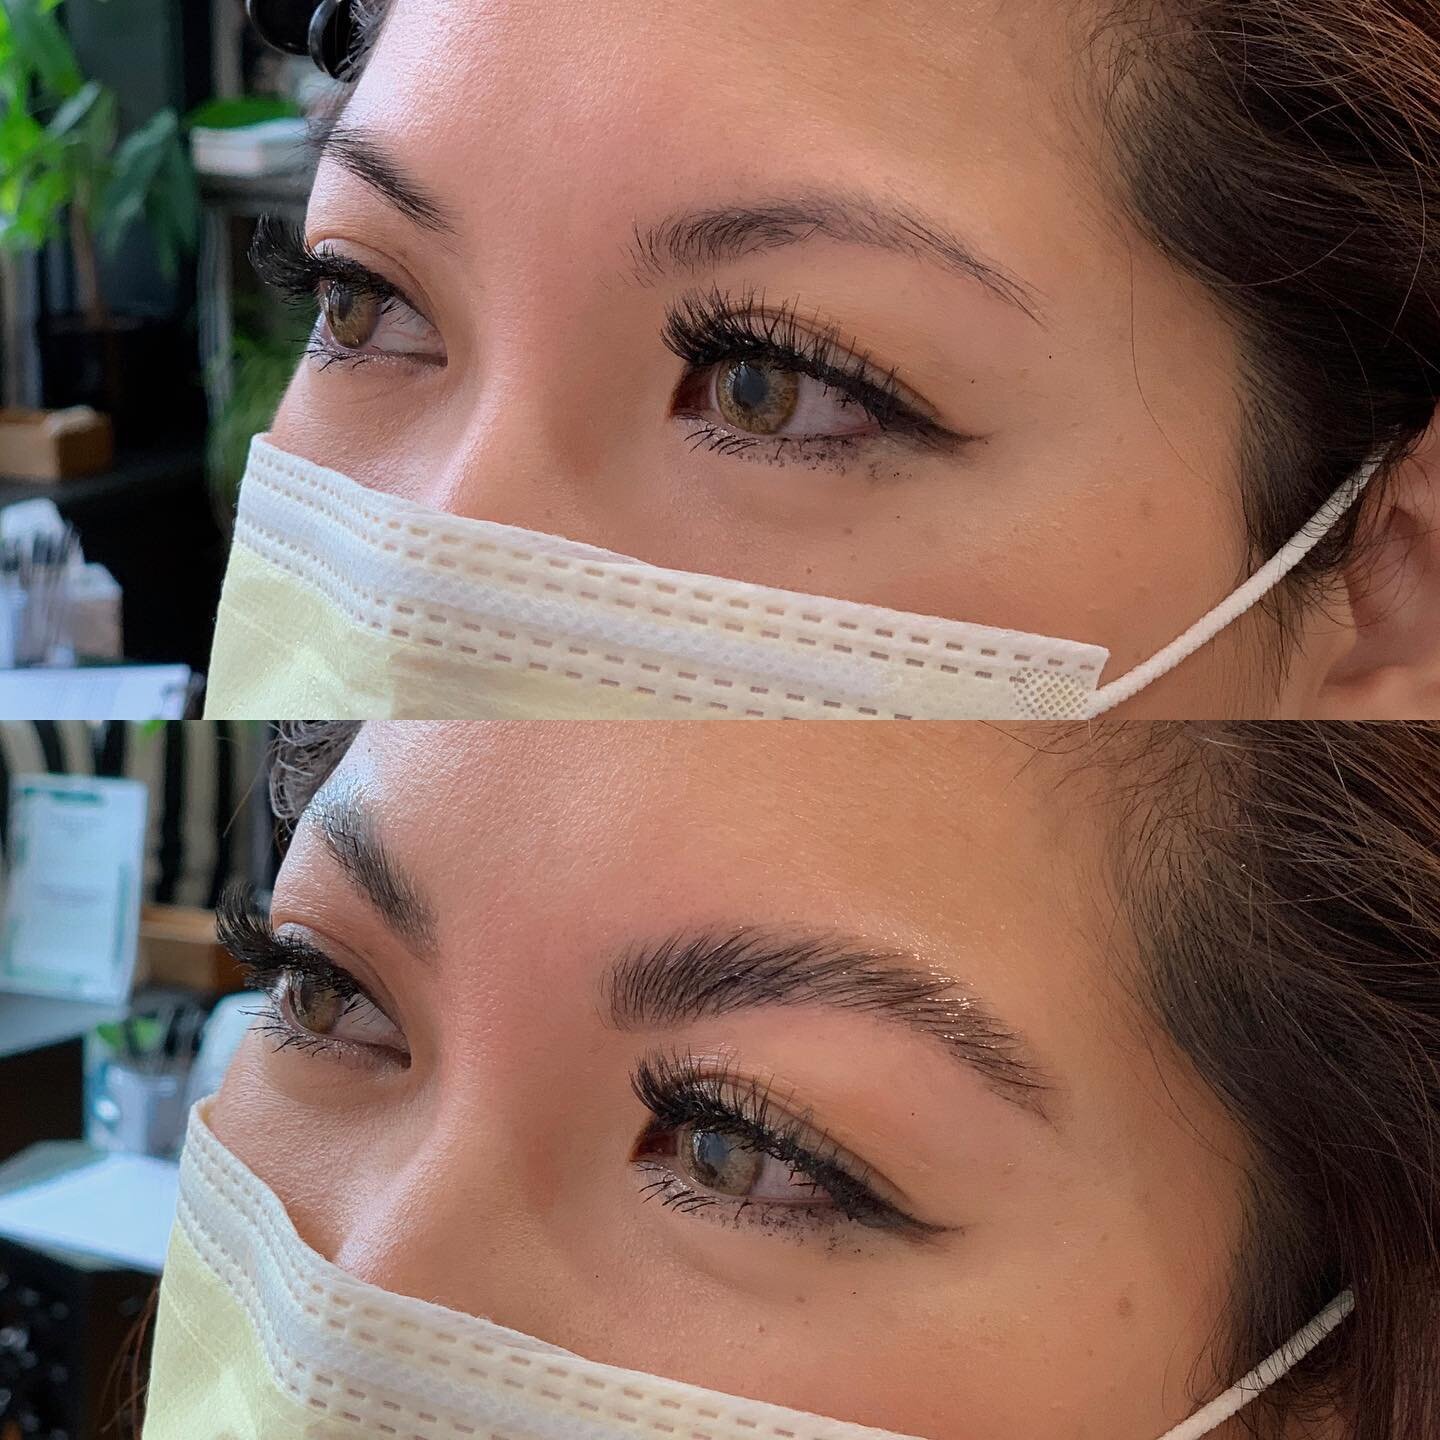 More lovely lammys 🥰 thanks for coming by again @h12zy 
.
.

#brows #browlamination #chicagobrows #browartist #browlift #fluffybrows #boybrow #nowopen #fixhairstudio #nowtrending #newbrows #newbrowswhodis #glowupseason #beautytips #chicago #chicagob